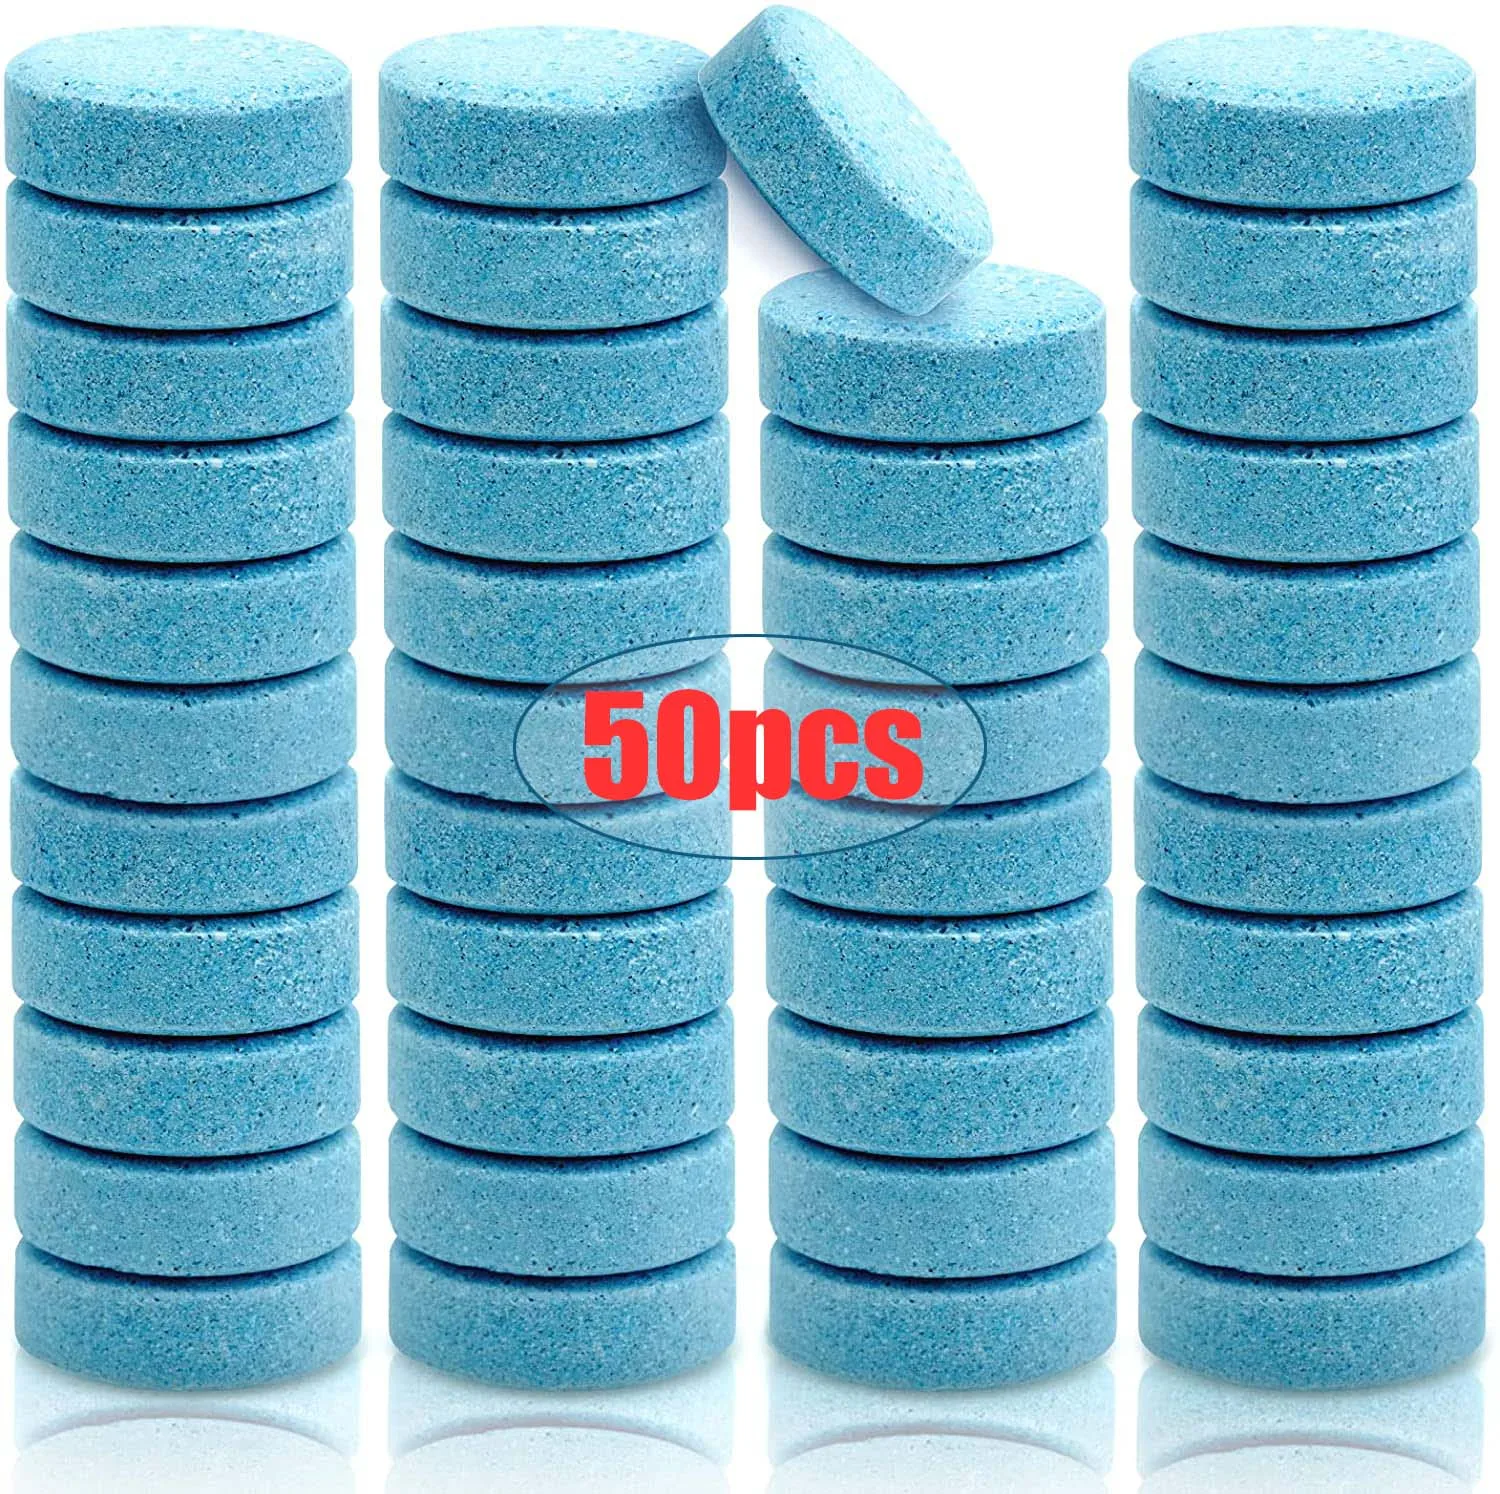 

50 Concentrated Tablets Detergent Car Windshield Cleaning Effervescent Tablets Ultra-clear Wiper Glass Cleaner for Home Toilet